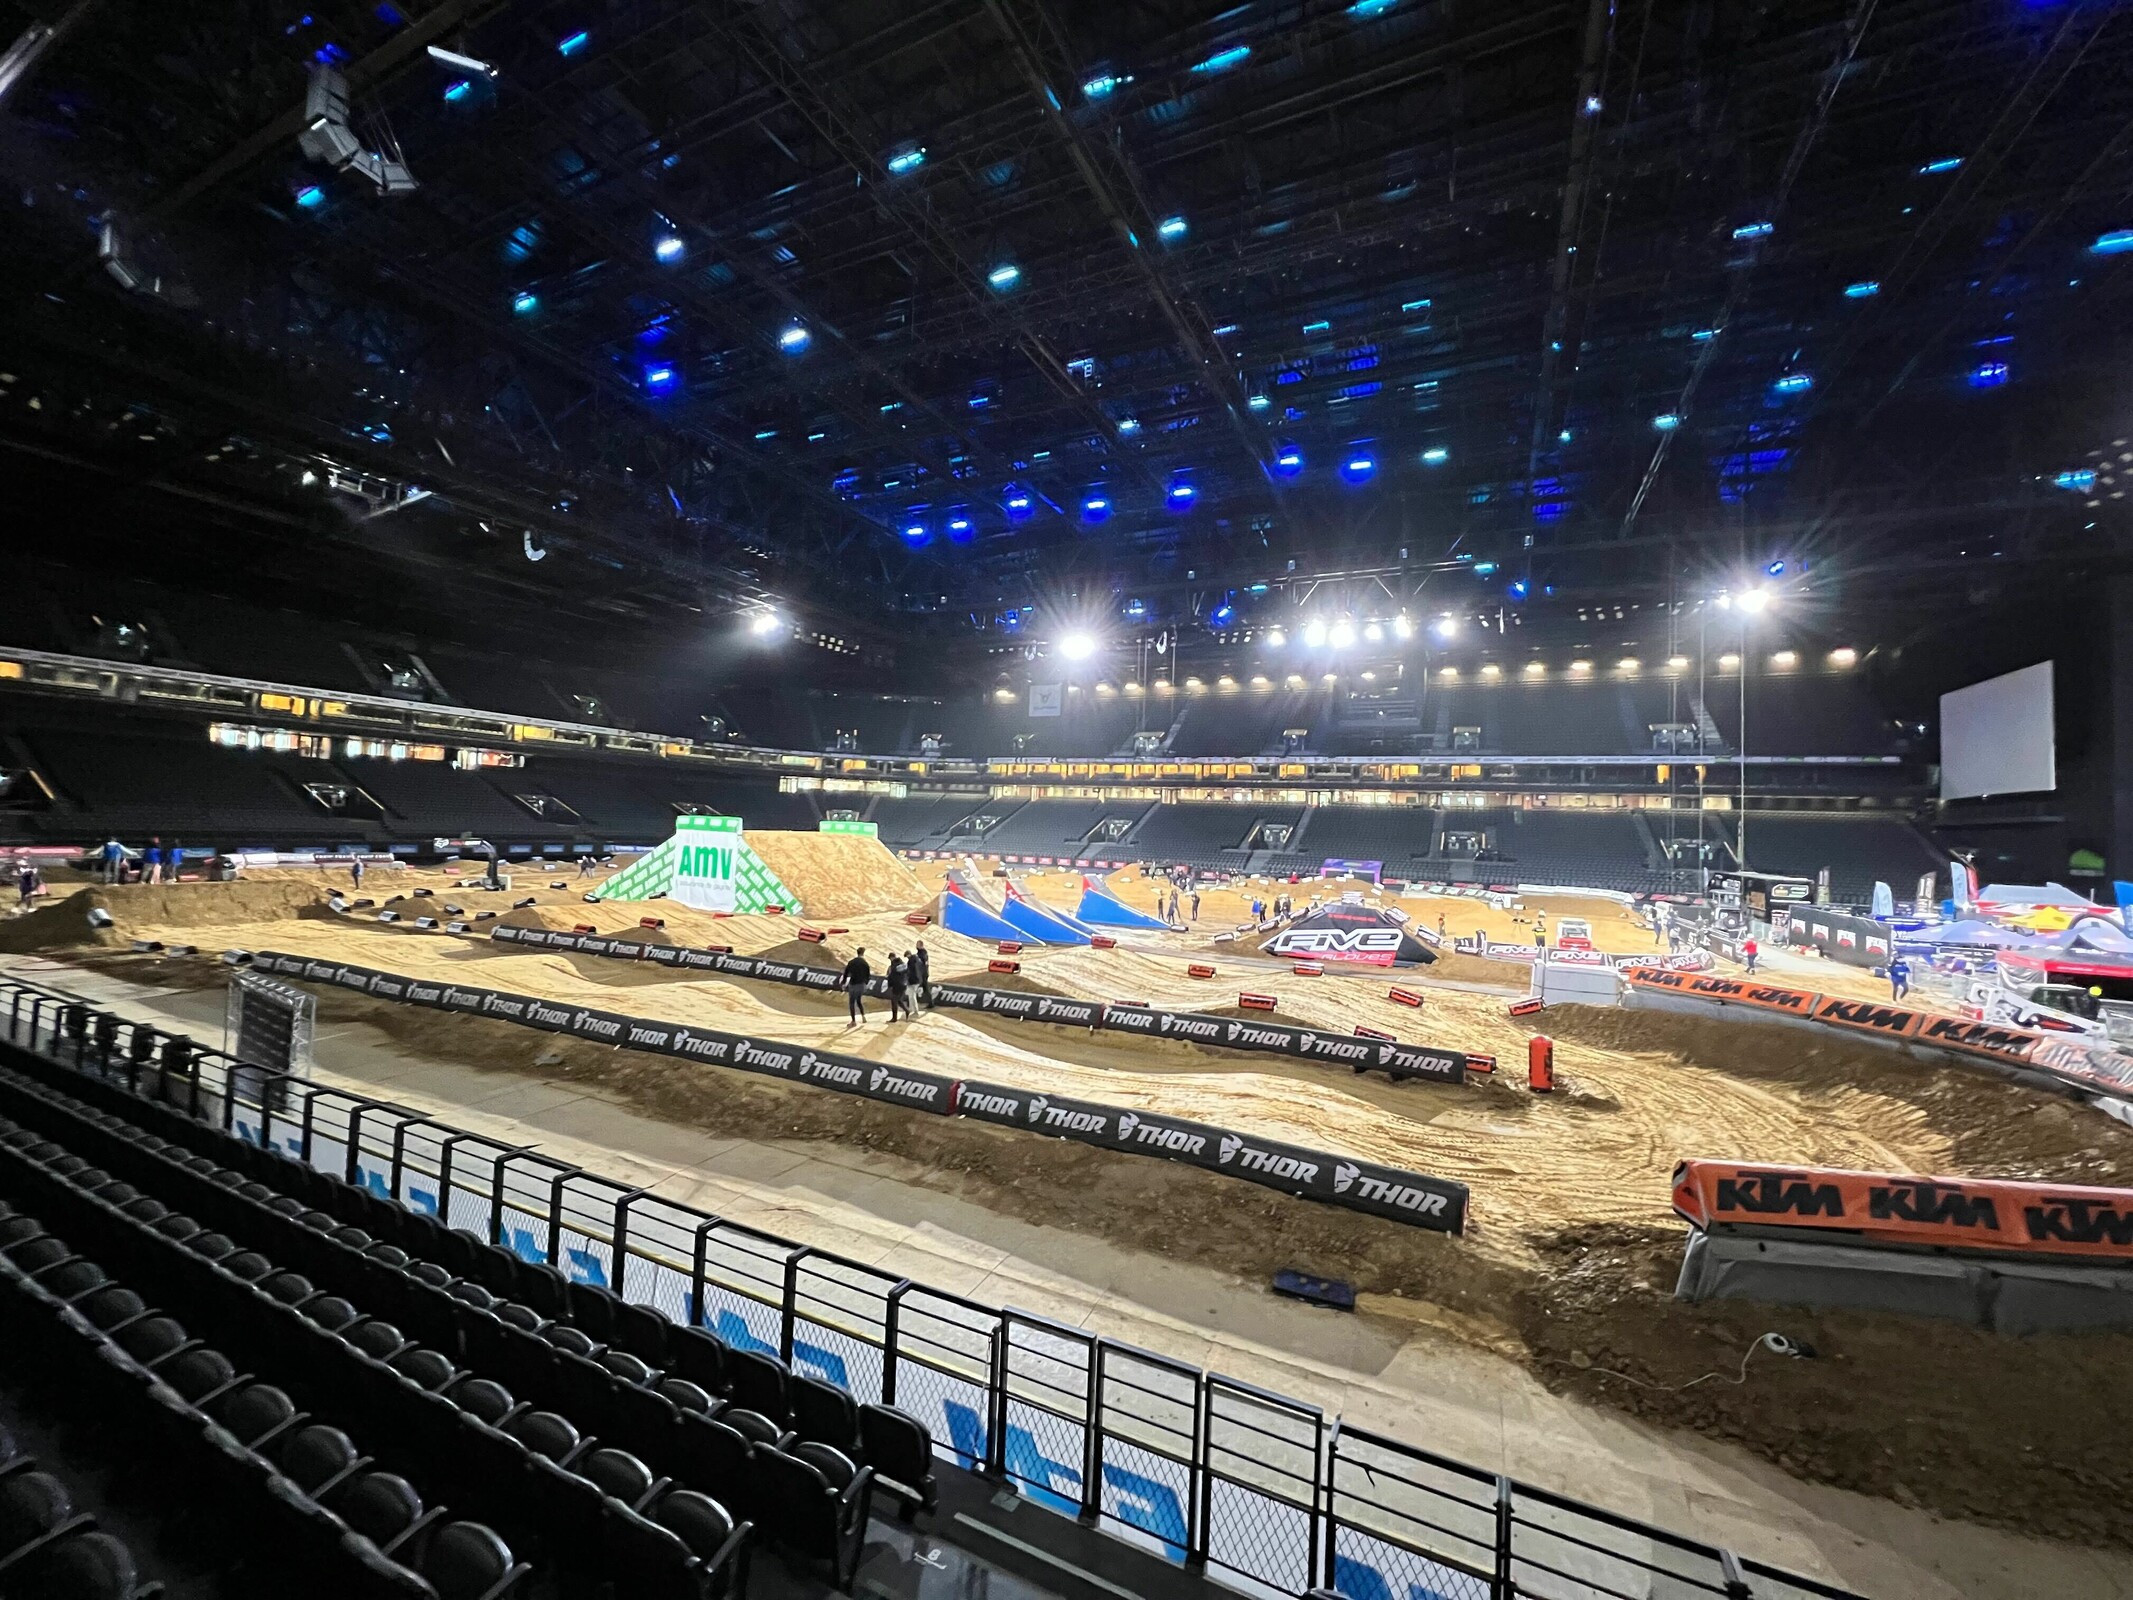 Paris is ready for the return of supercross.